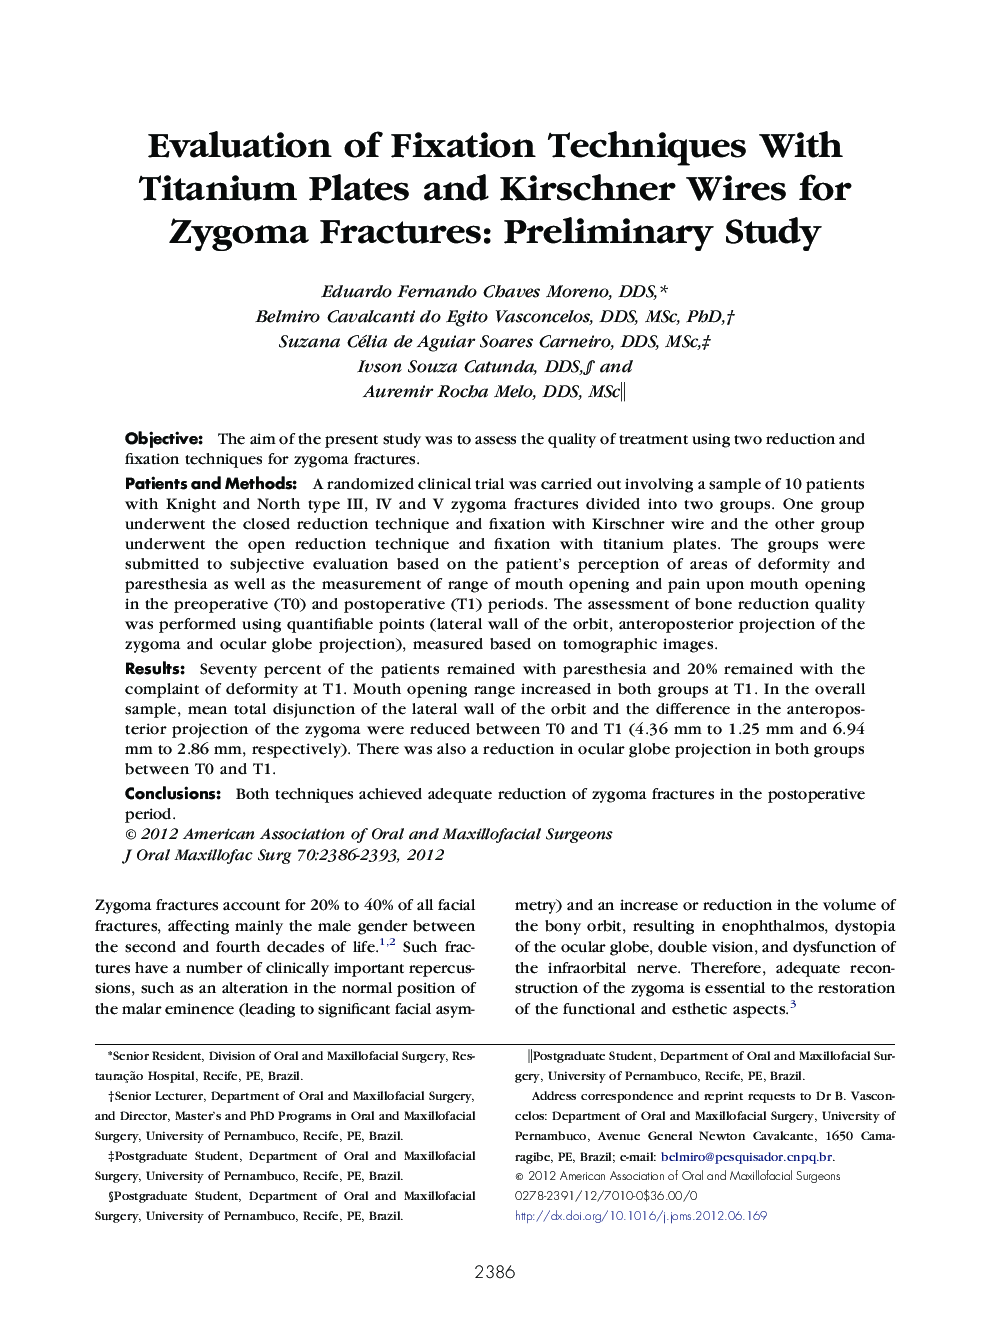 Evaluation of Fixation Techniques With Titanium Plates and Kirschner Wires for Zygoma Fractures: Preliminary Study